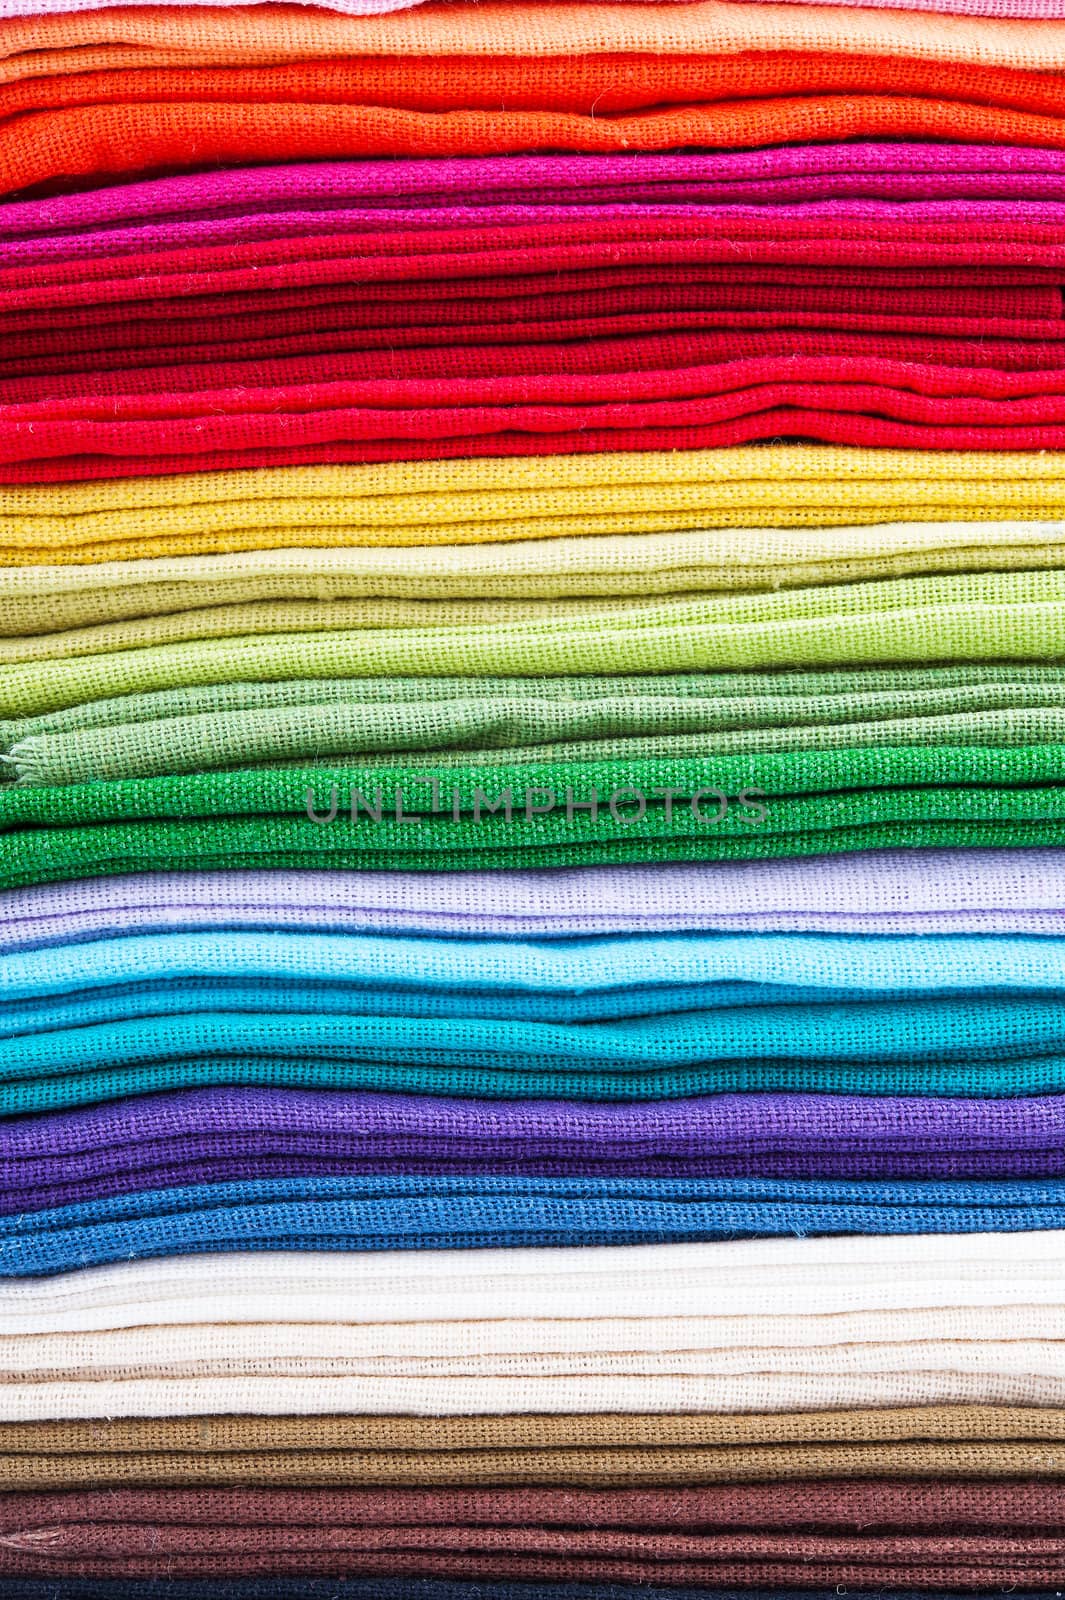 Background of a stack of linen fabric texture